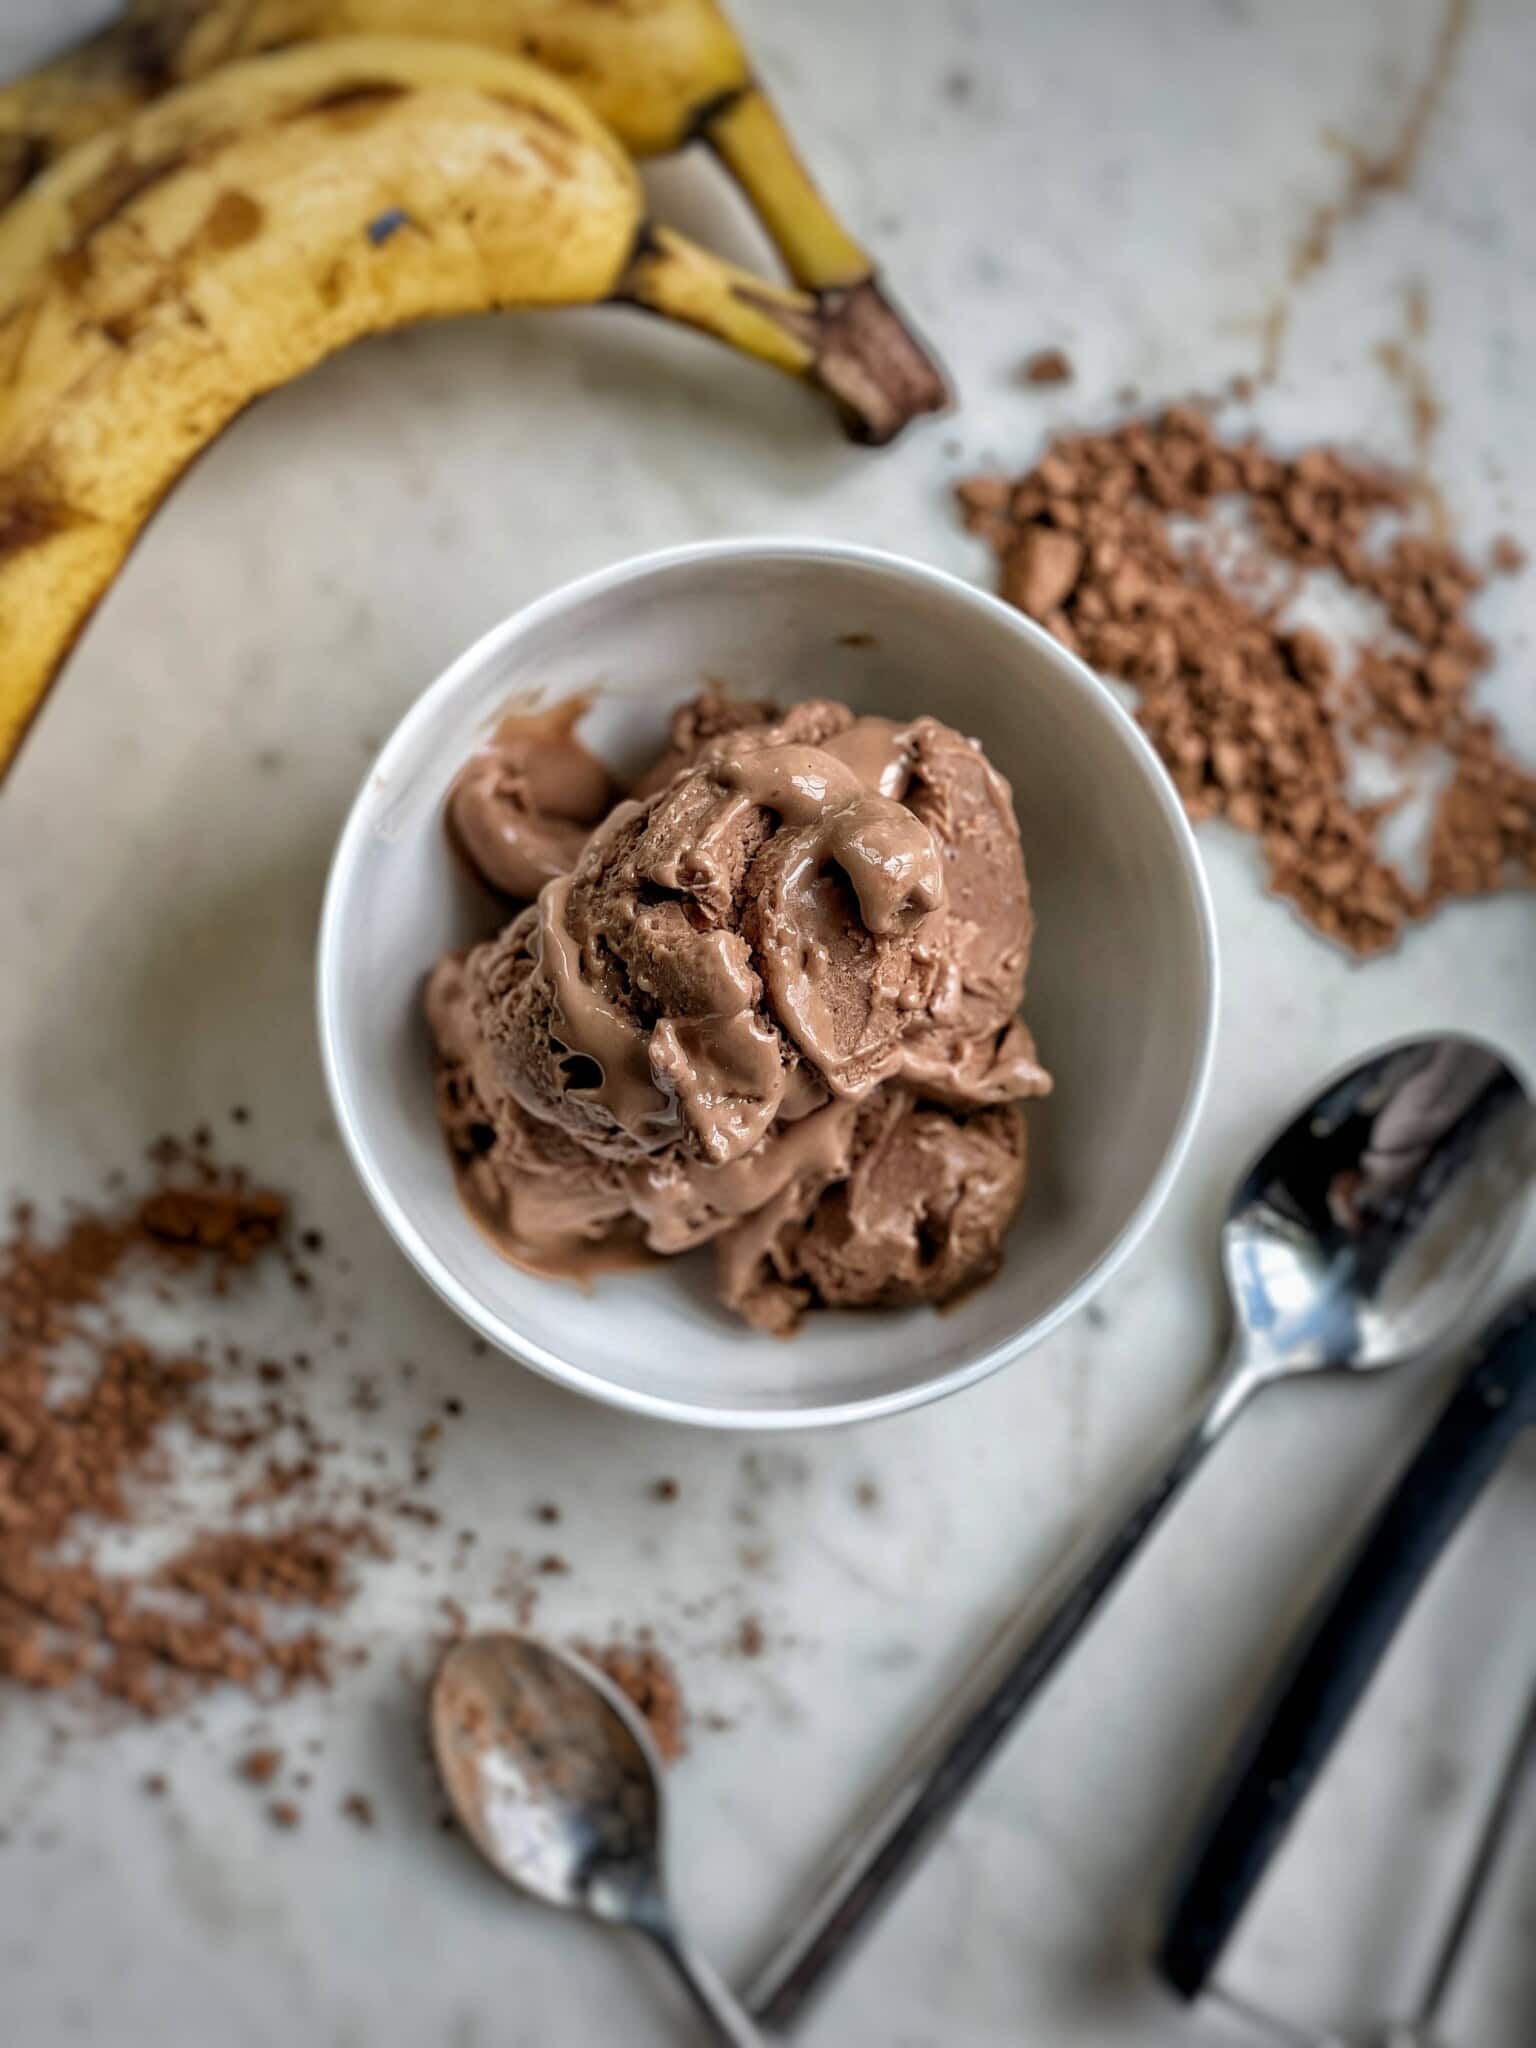 Chocolate peanut butter cottage cheese ice cream in a bowl on a counter top with ingredients spread around.